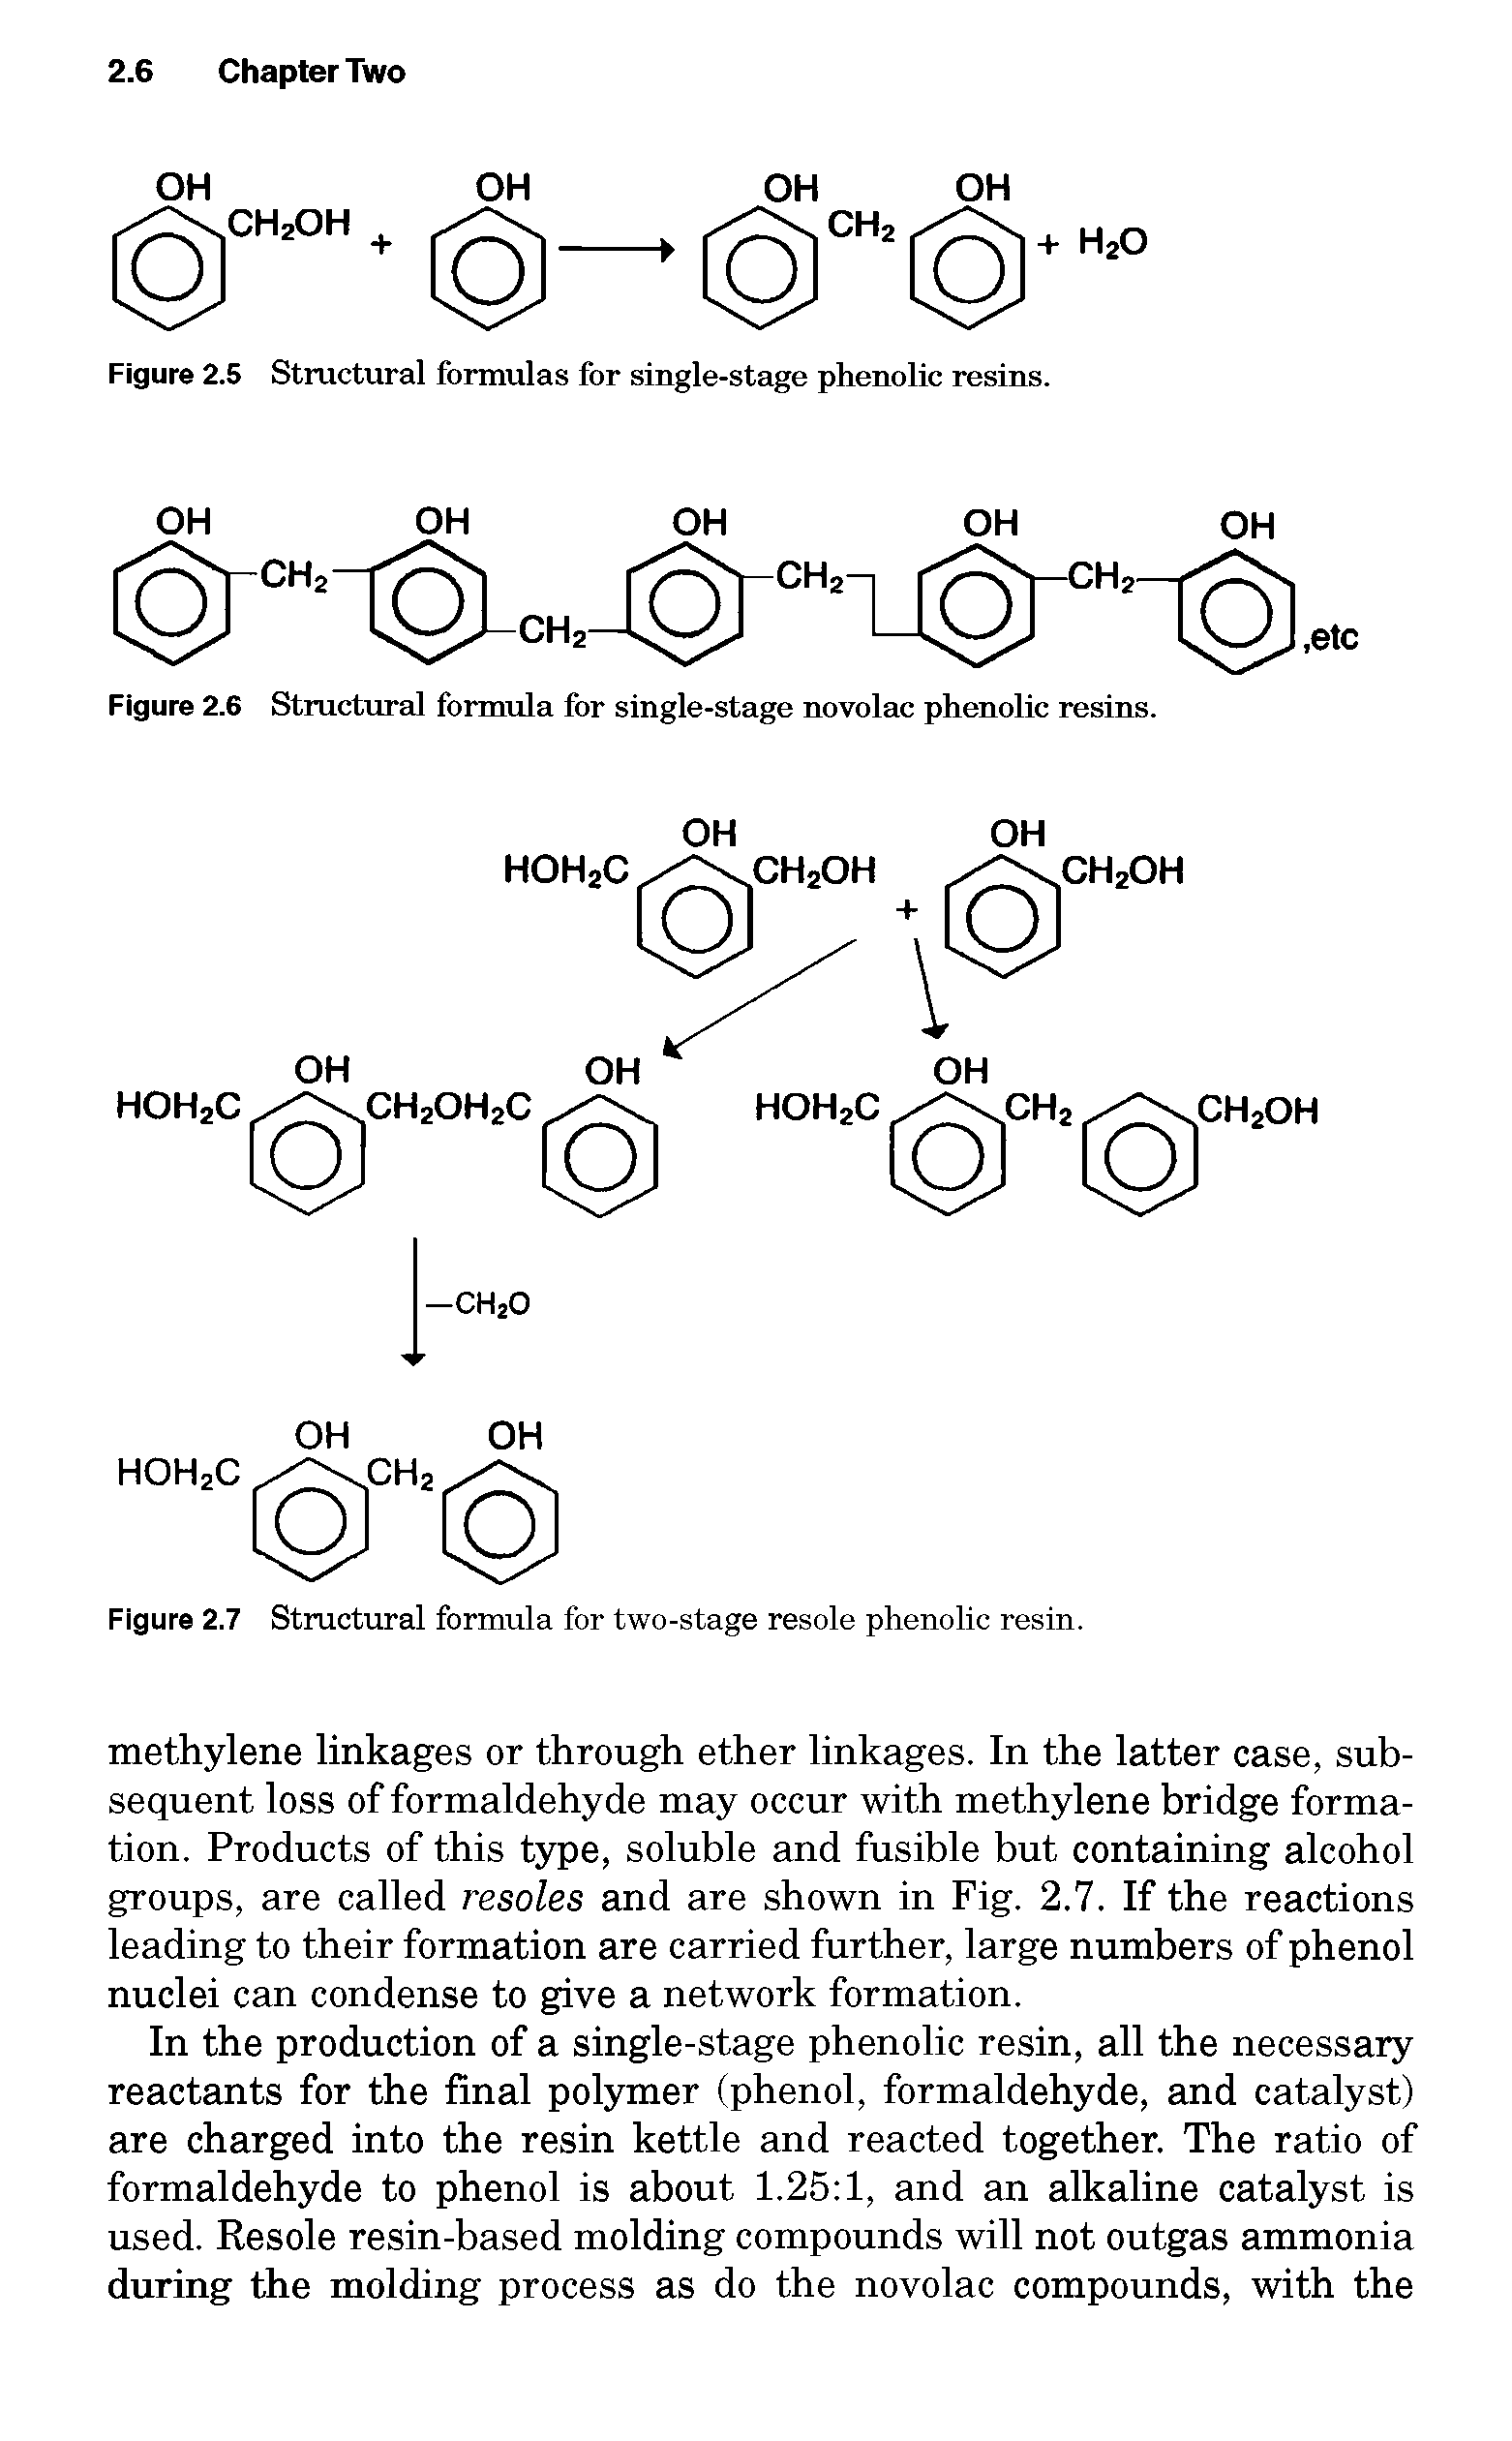 Figure 2.7 Structural formula for two-stage resole phenolic resin.